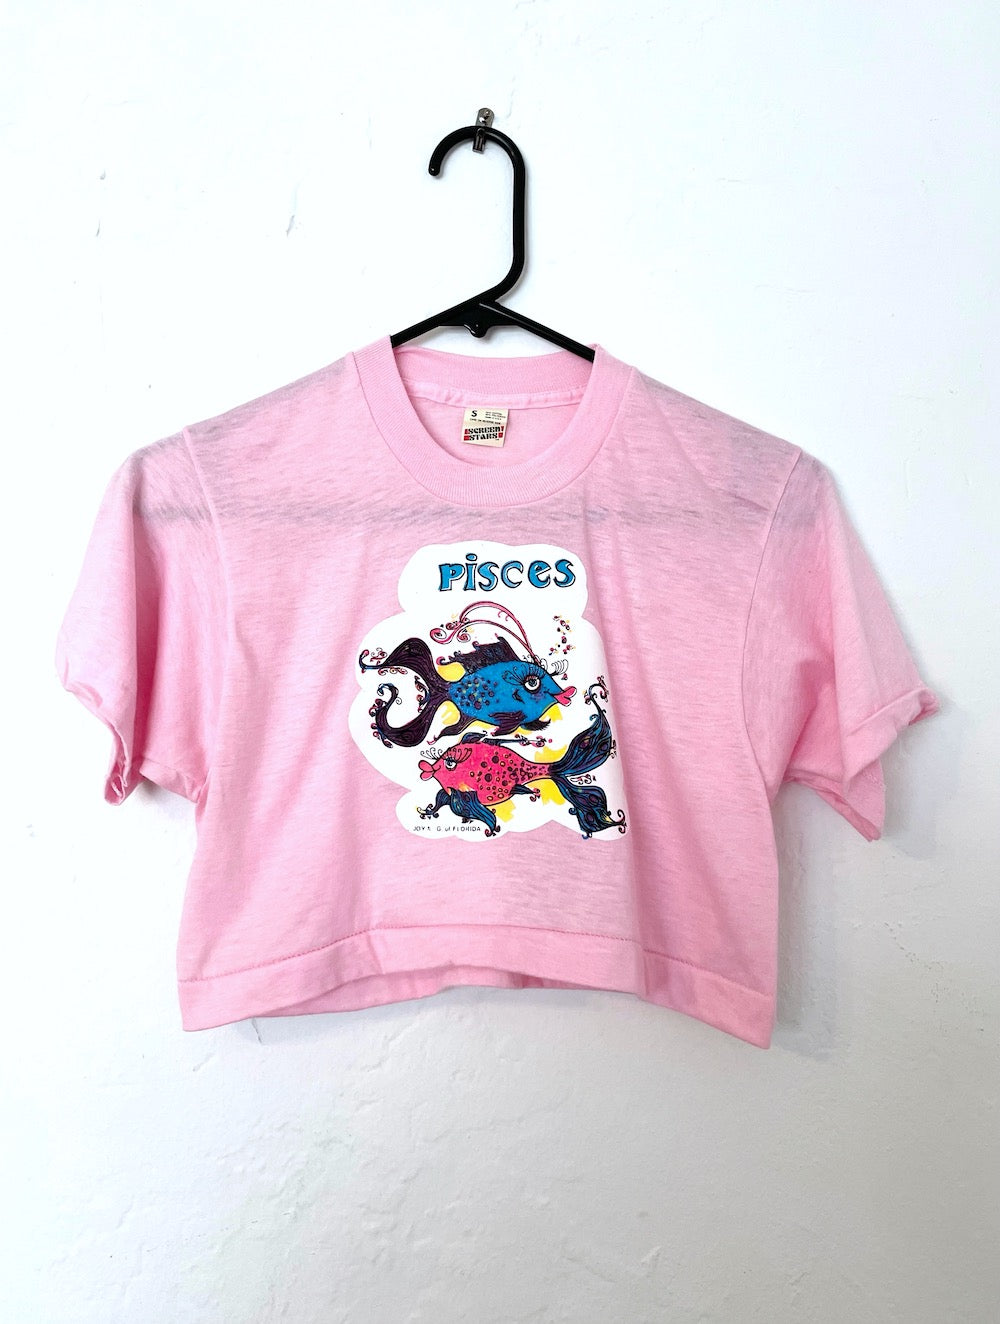 Vintage 70s Pisces Baby Pink Cropped Tee